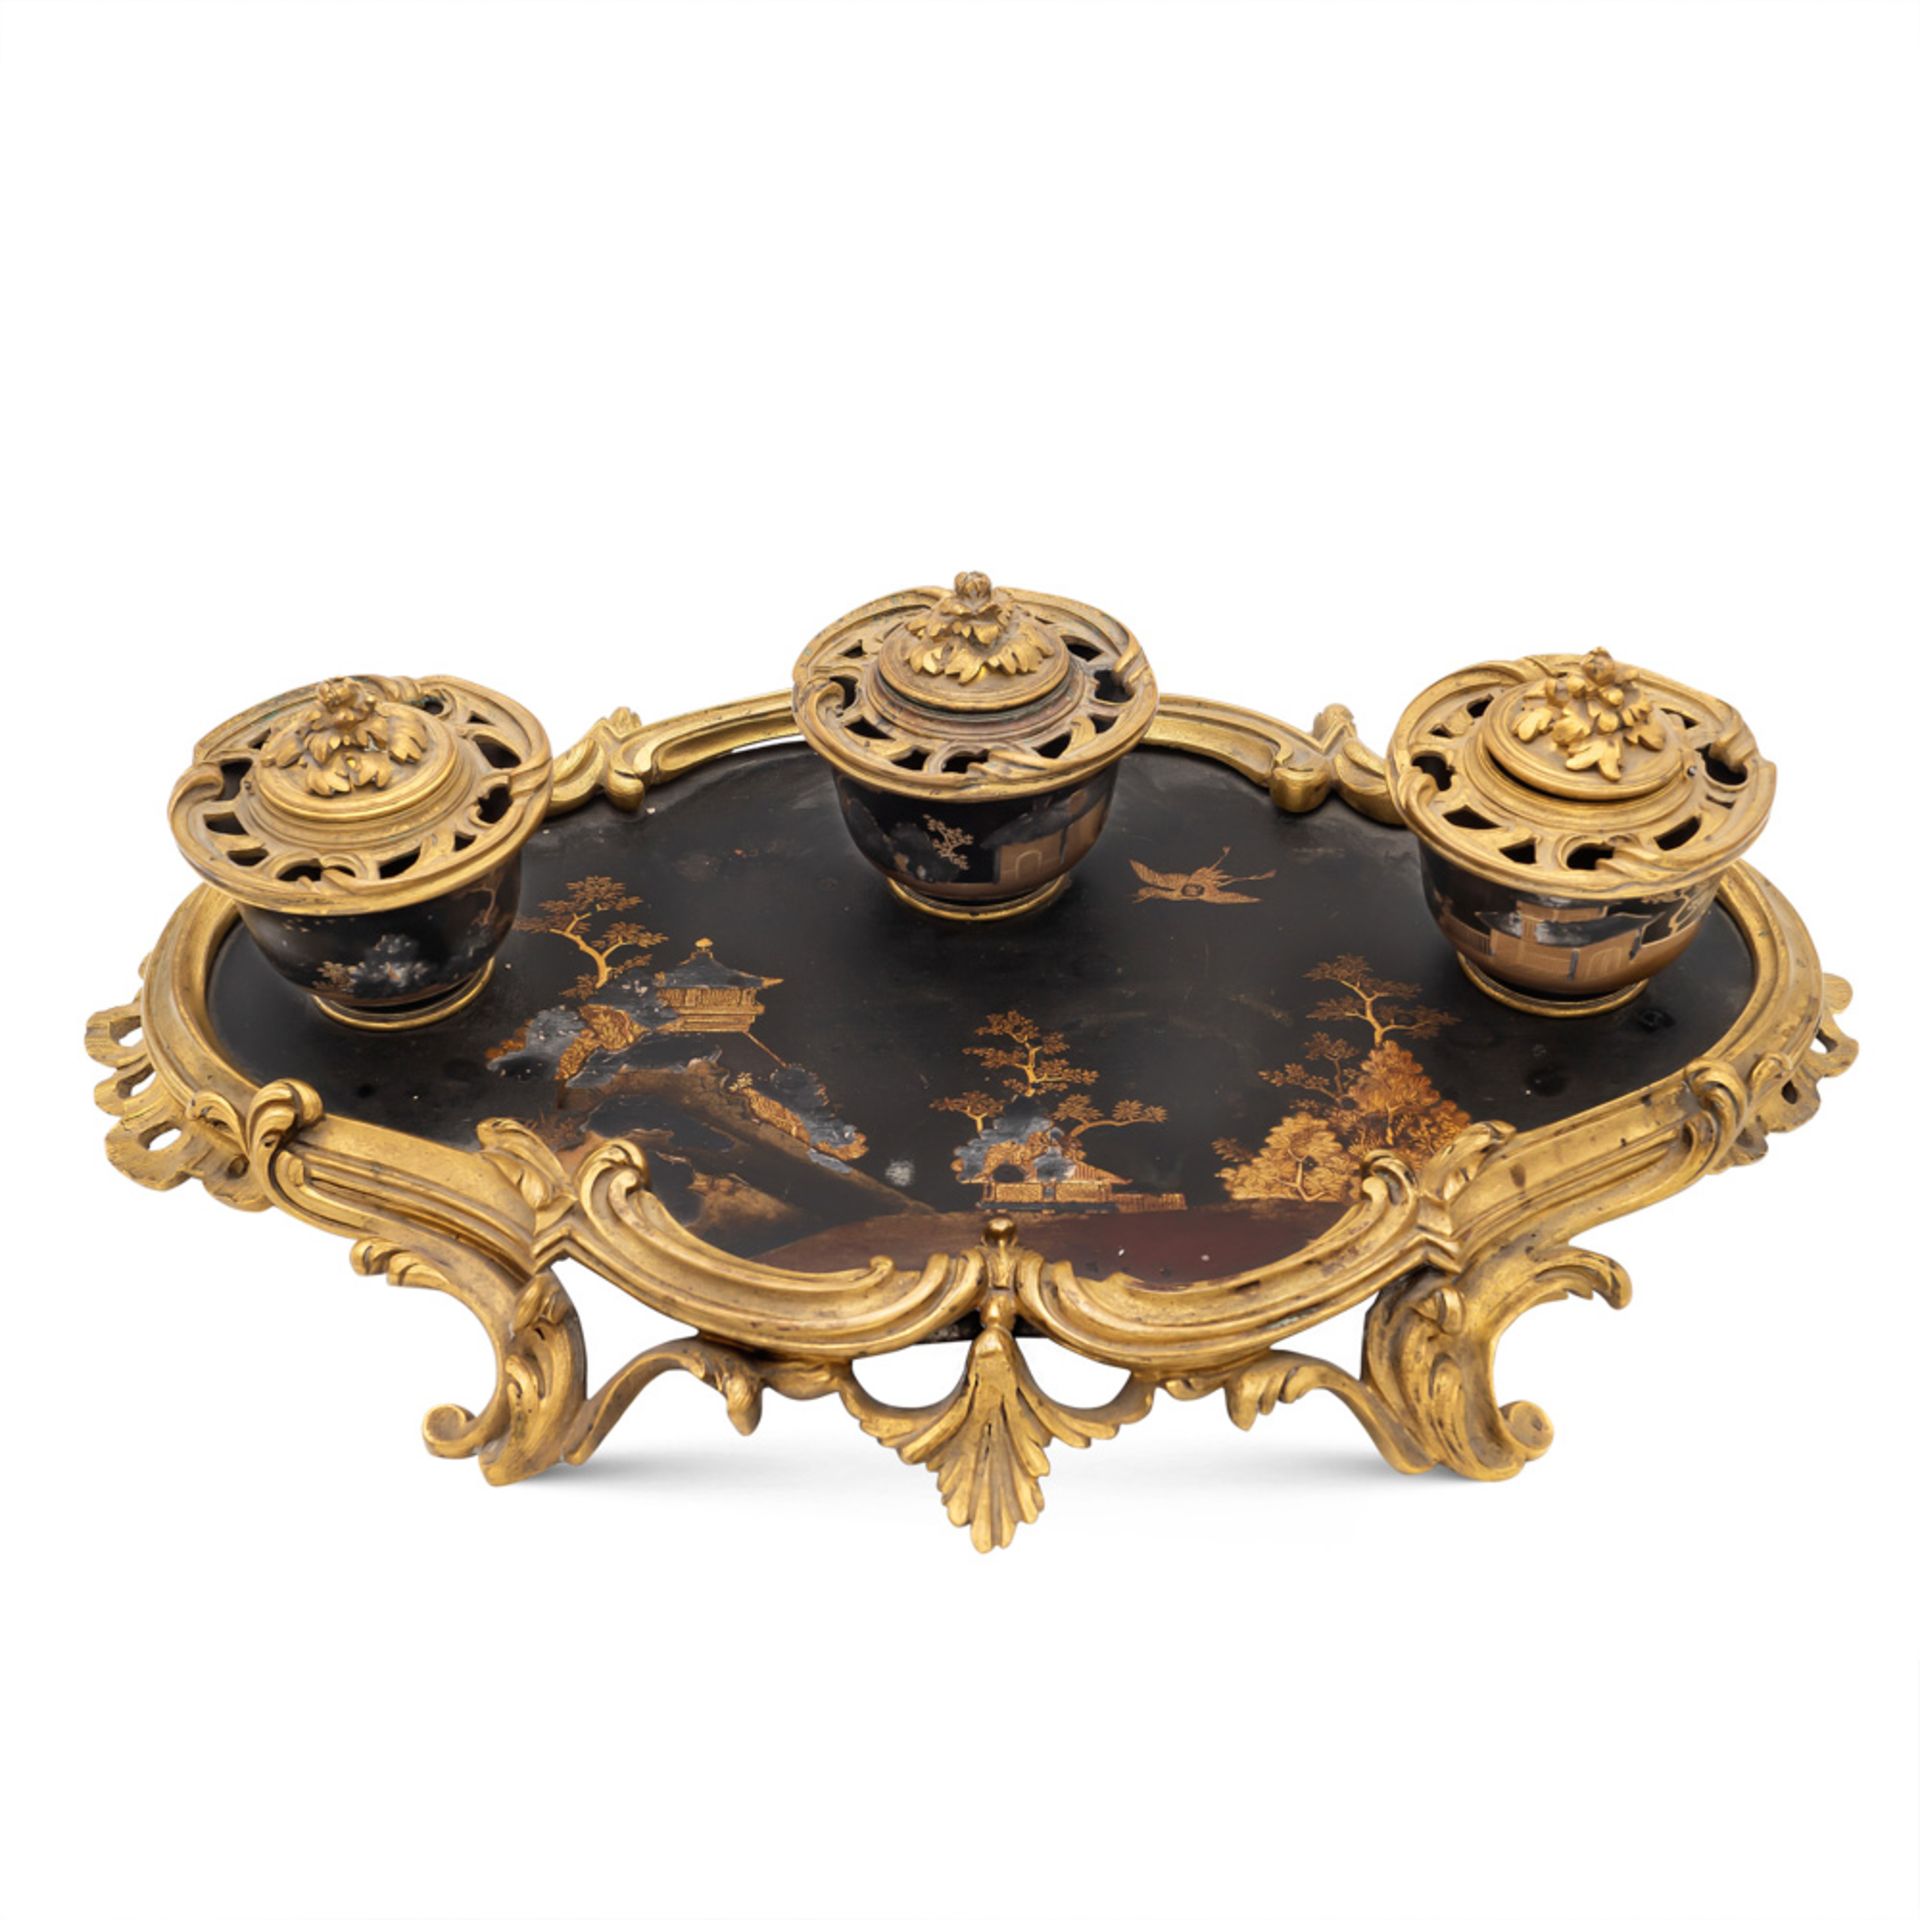 Gilt bronze and lacquered wood inkwell France, 19th century 9x33x20 cm.